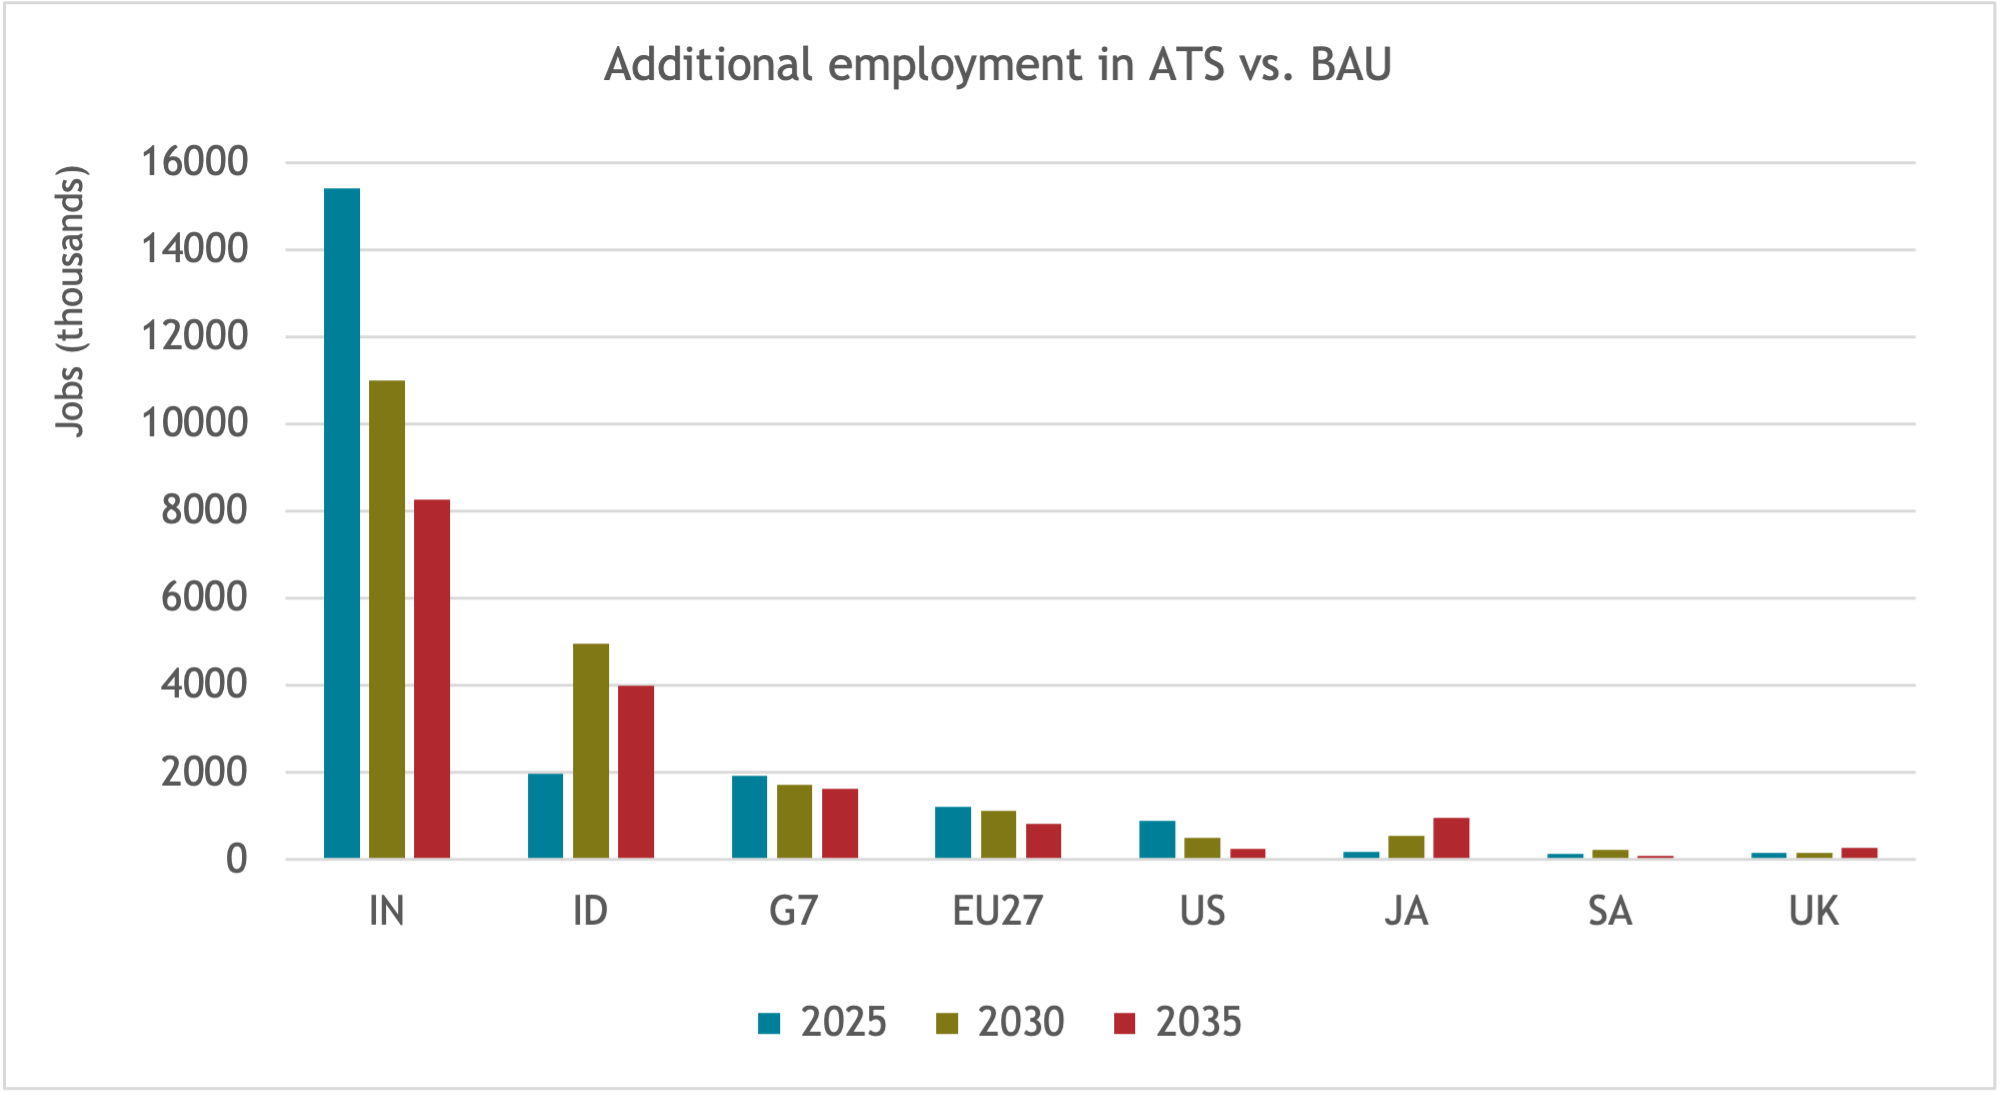 Additional employment in ATS vs BAU